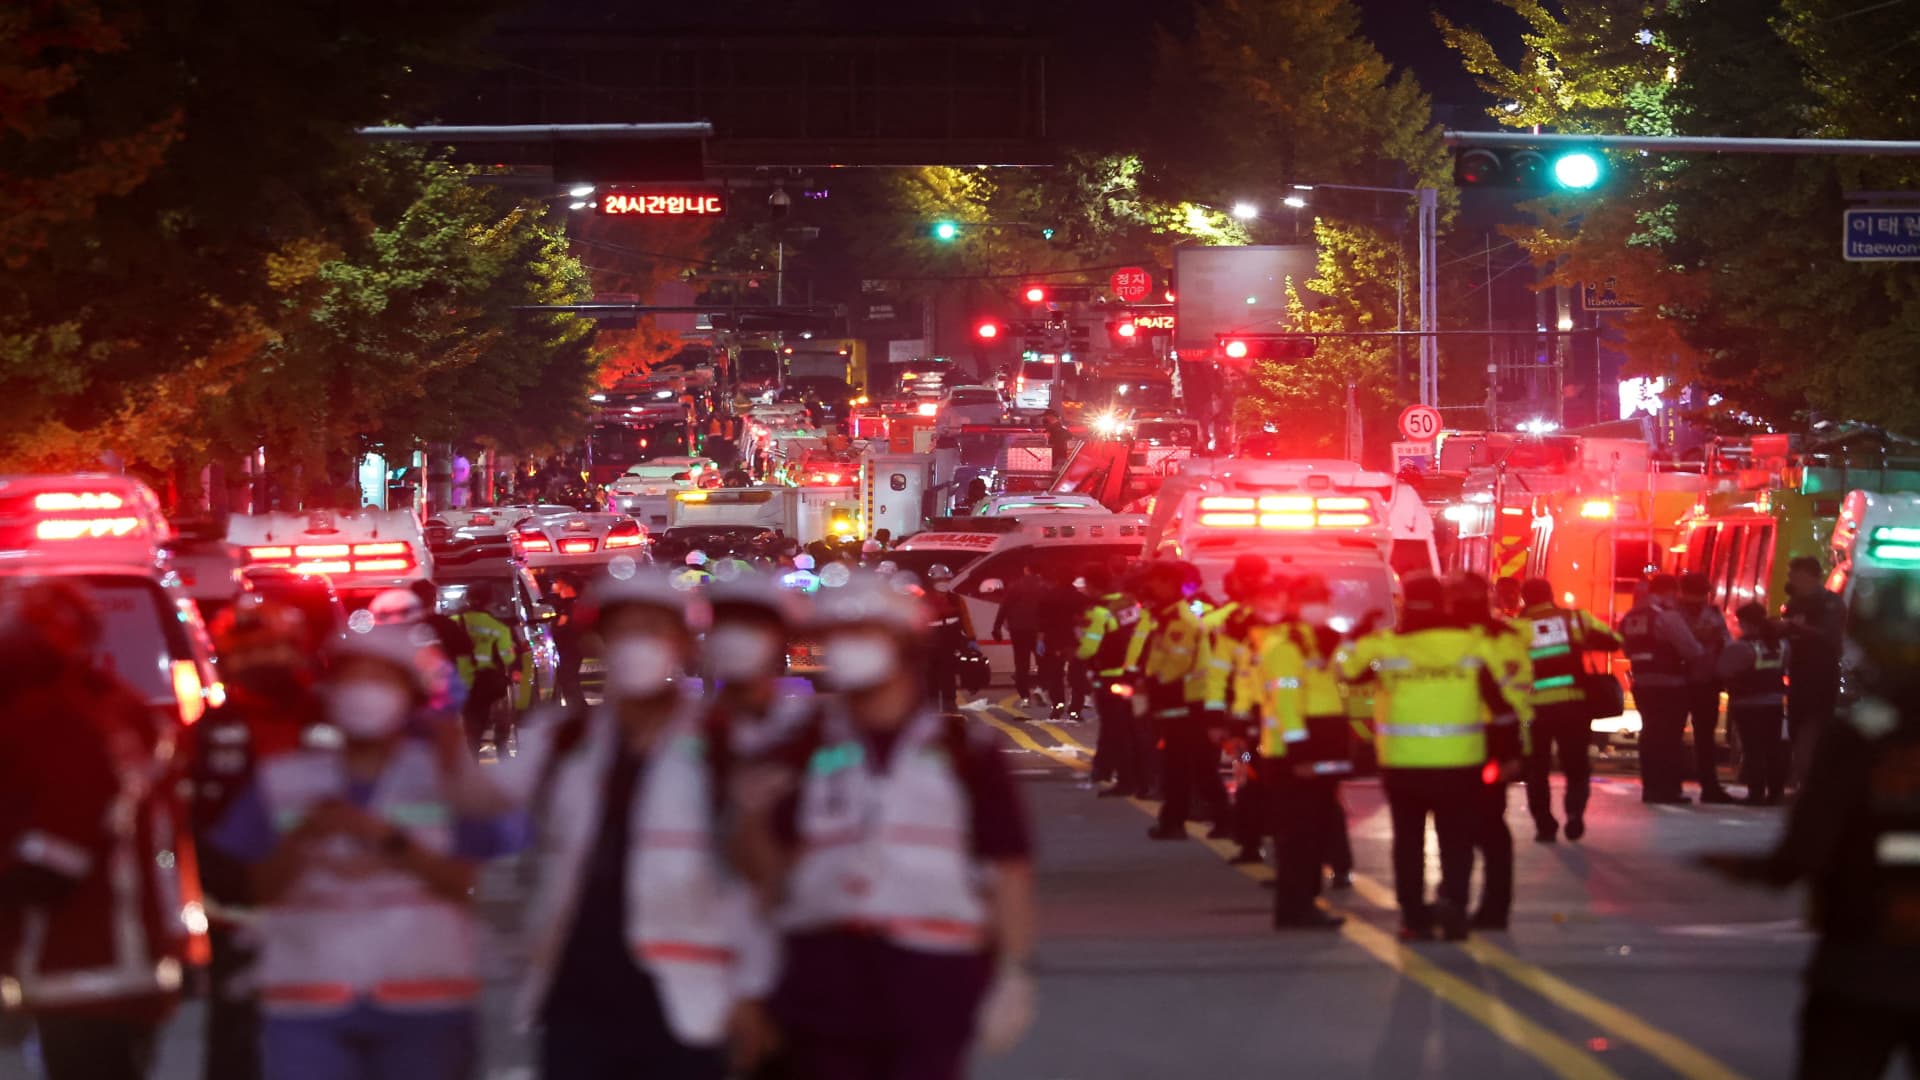 59 dead after Halloween crowd surge in Seoul